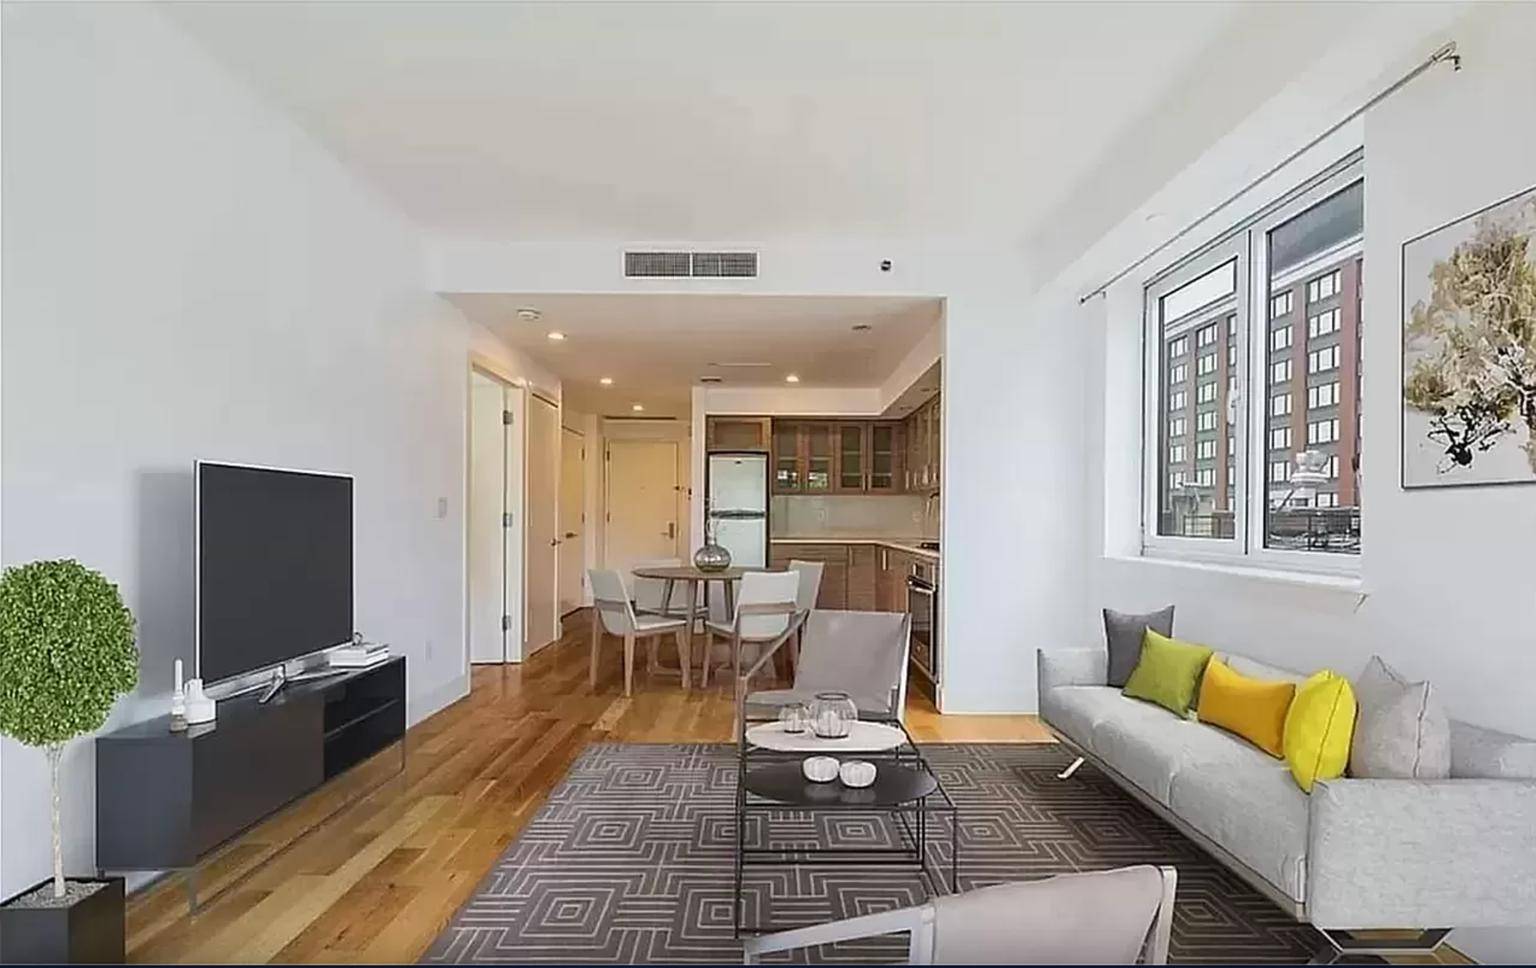 INQUIRE FOR VIDEOAVAILABLE ASAPLive in this beautiful, large one bedroom one bathroom apartment in a pristine ELEVATOR building on a quiet East Harlem block !